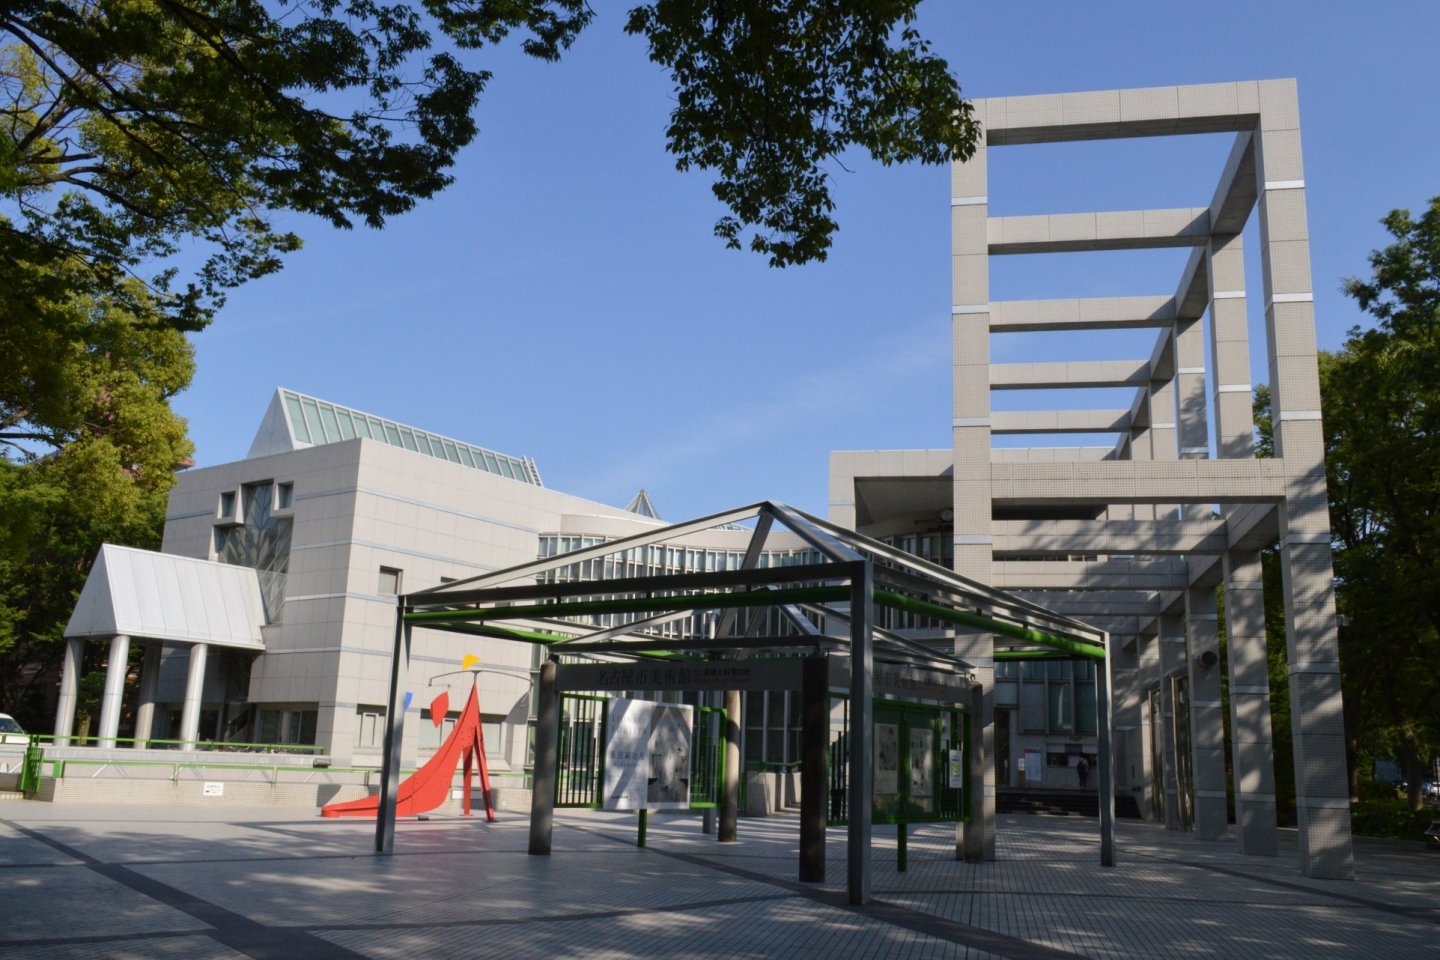 The exhibition will take place at the Nagoya City Museum of Art